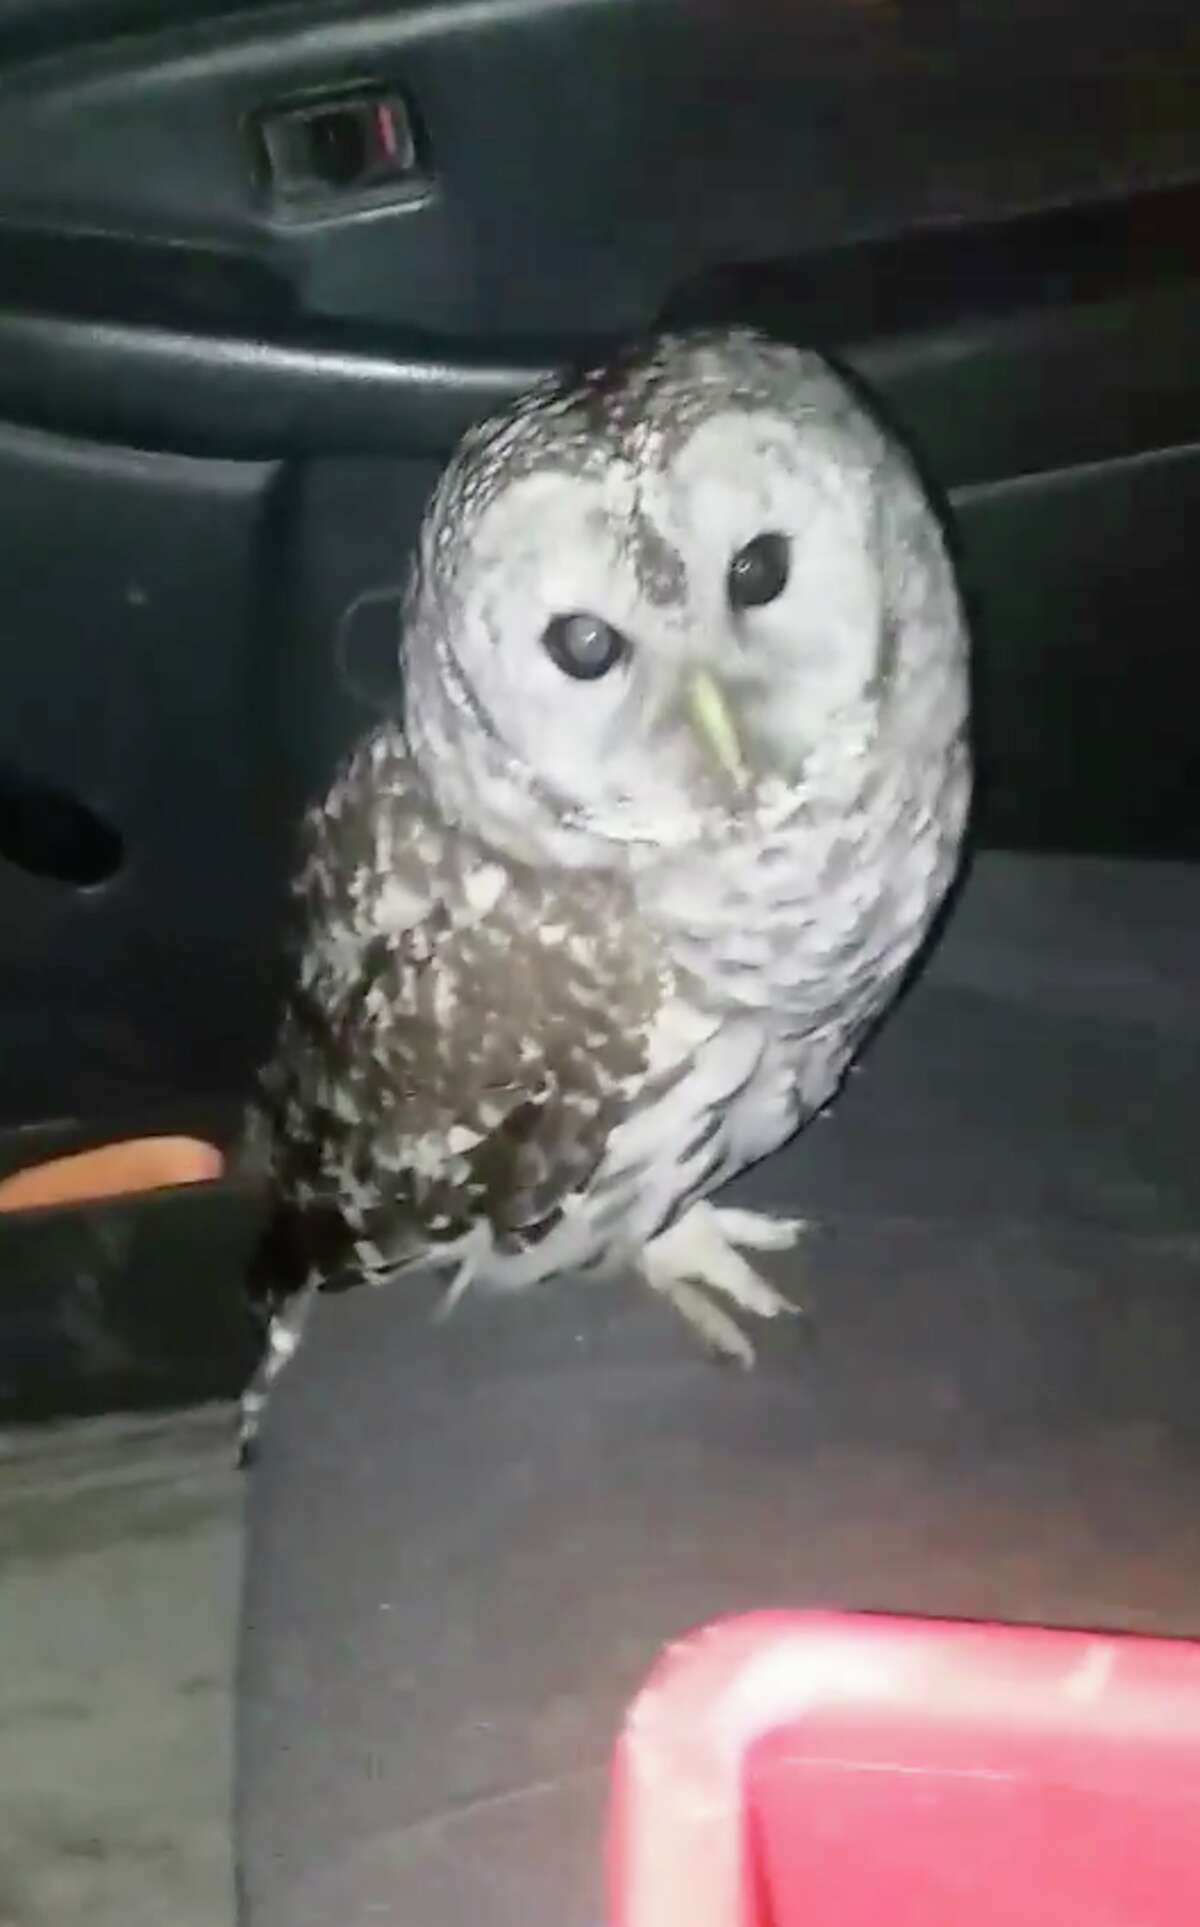 An owl flew through a moving pickup truck's window and into the driver's face on Jan. 2, 2019, in Averill Park, N.Y. The driver, Jeremy Dodge, suffered a few scrapes but the bird flew away, apparently uninjured. Keep clicking for more wild animal sightings in the Capital Region.